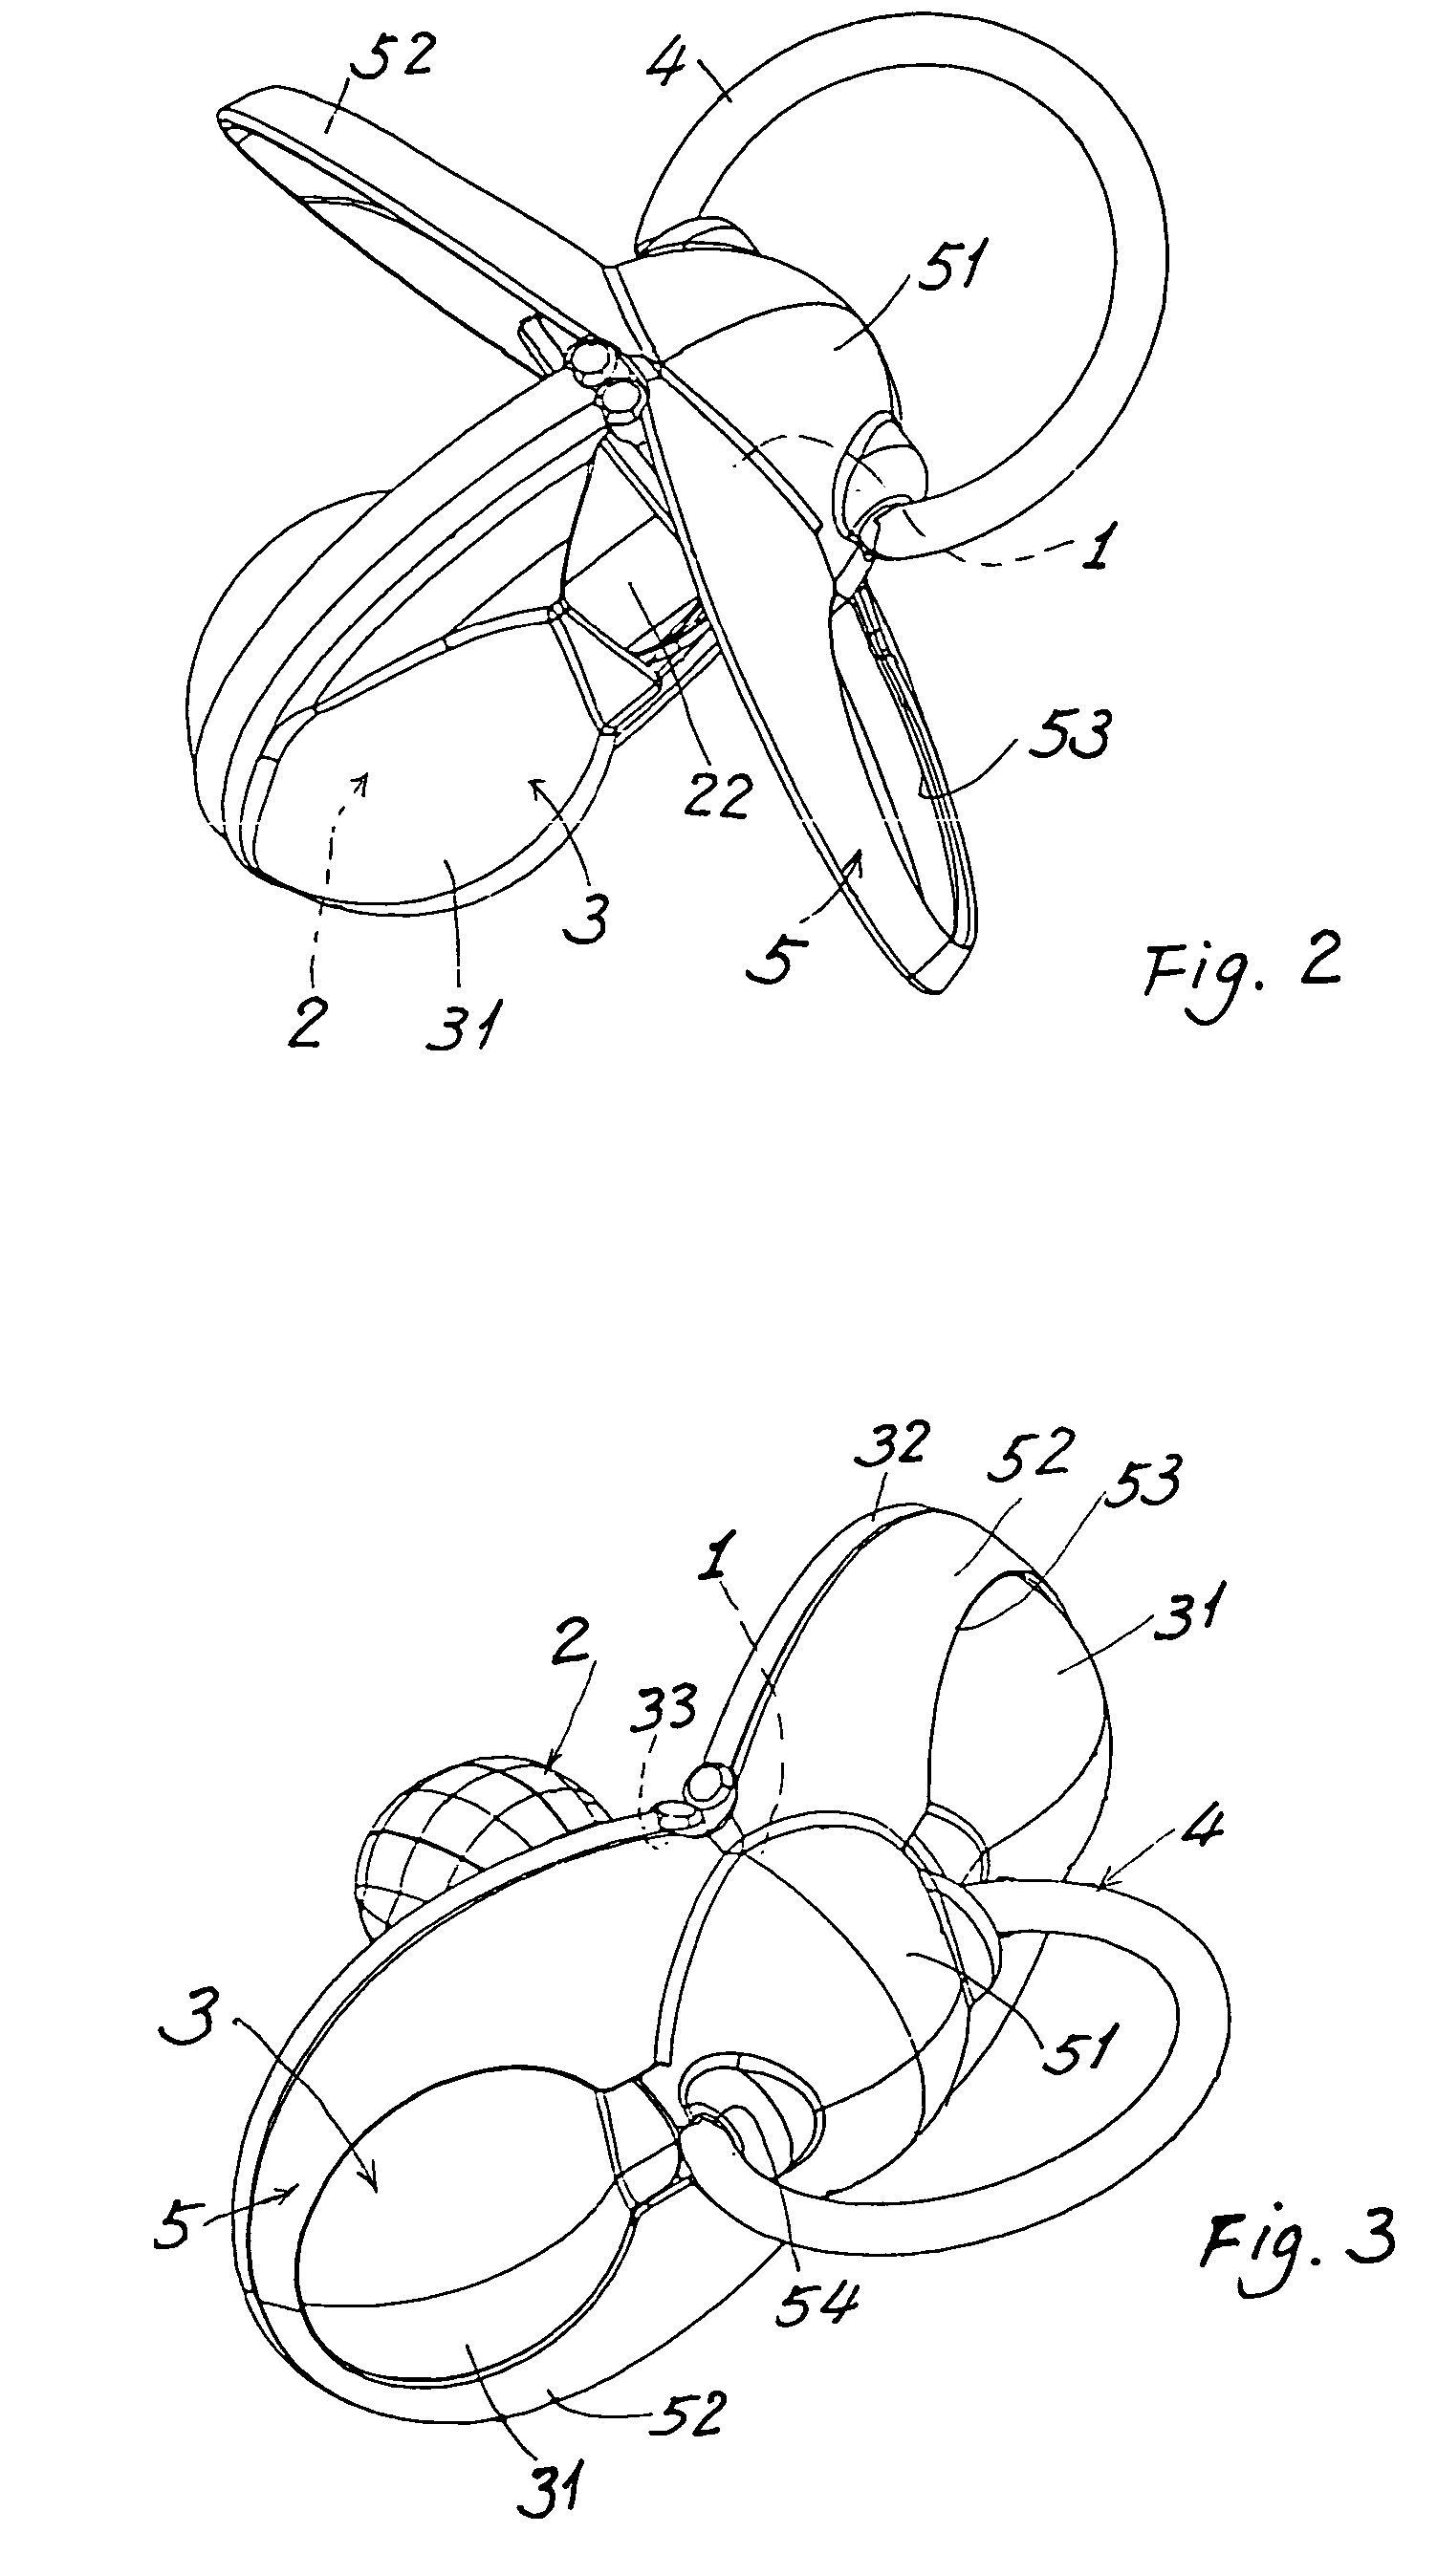 Anti-swallow pacifier with bivalve shell